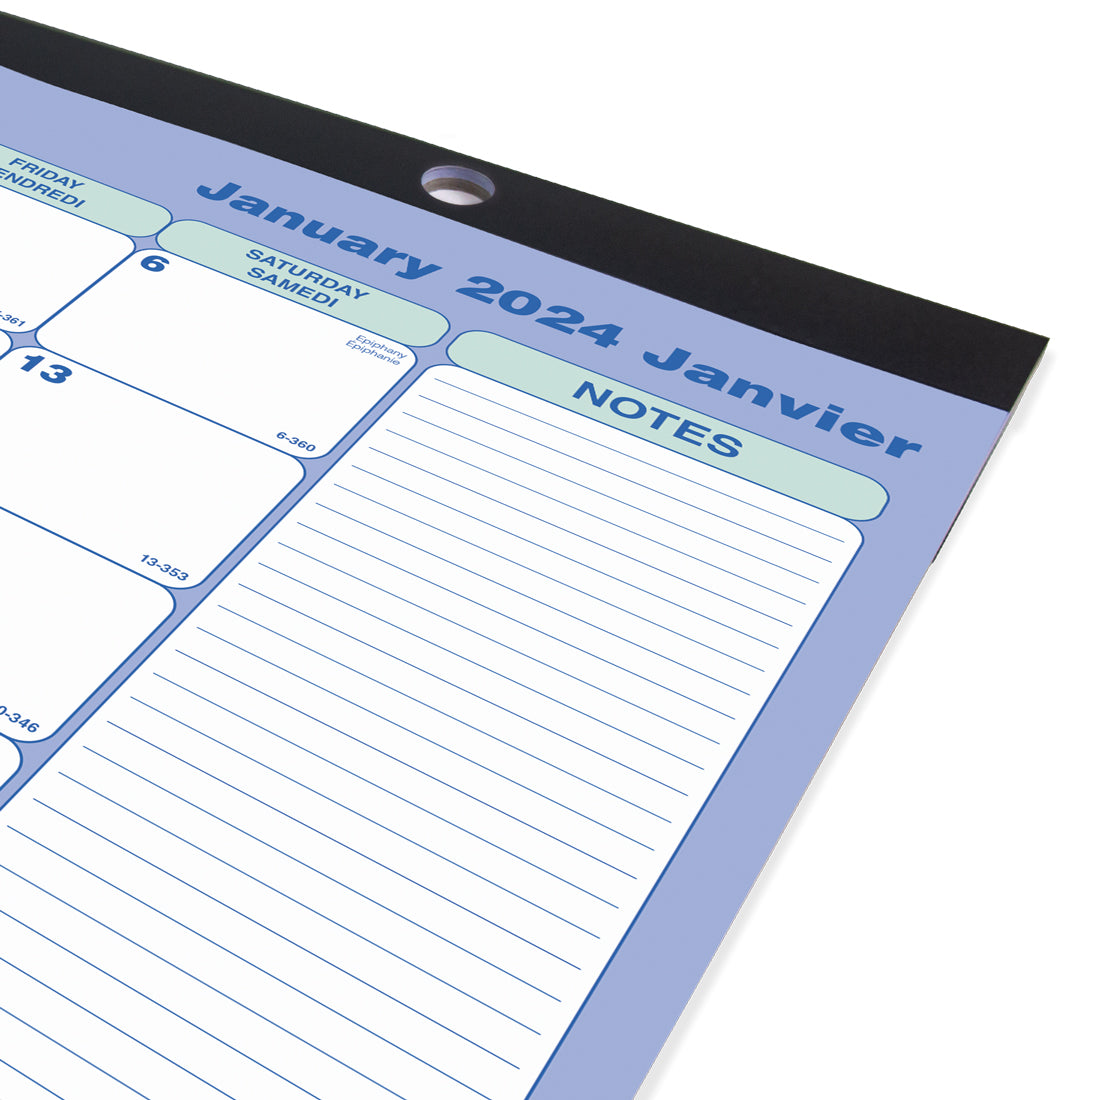 Monthly Desk Pad or Wall Calendar 2024, Bilingual<br>*2024 Edition now sold out